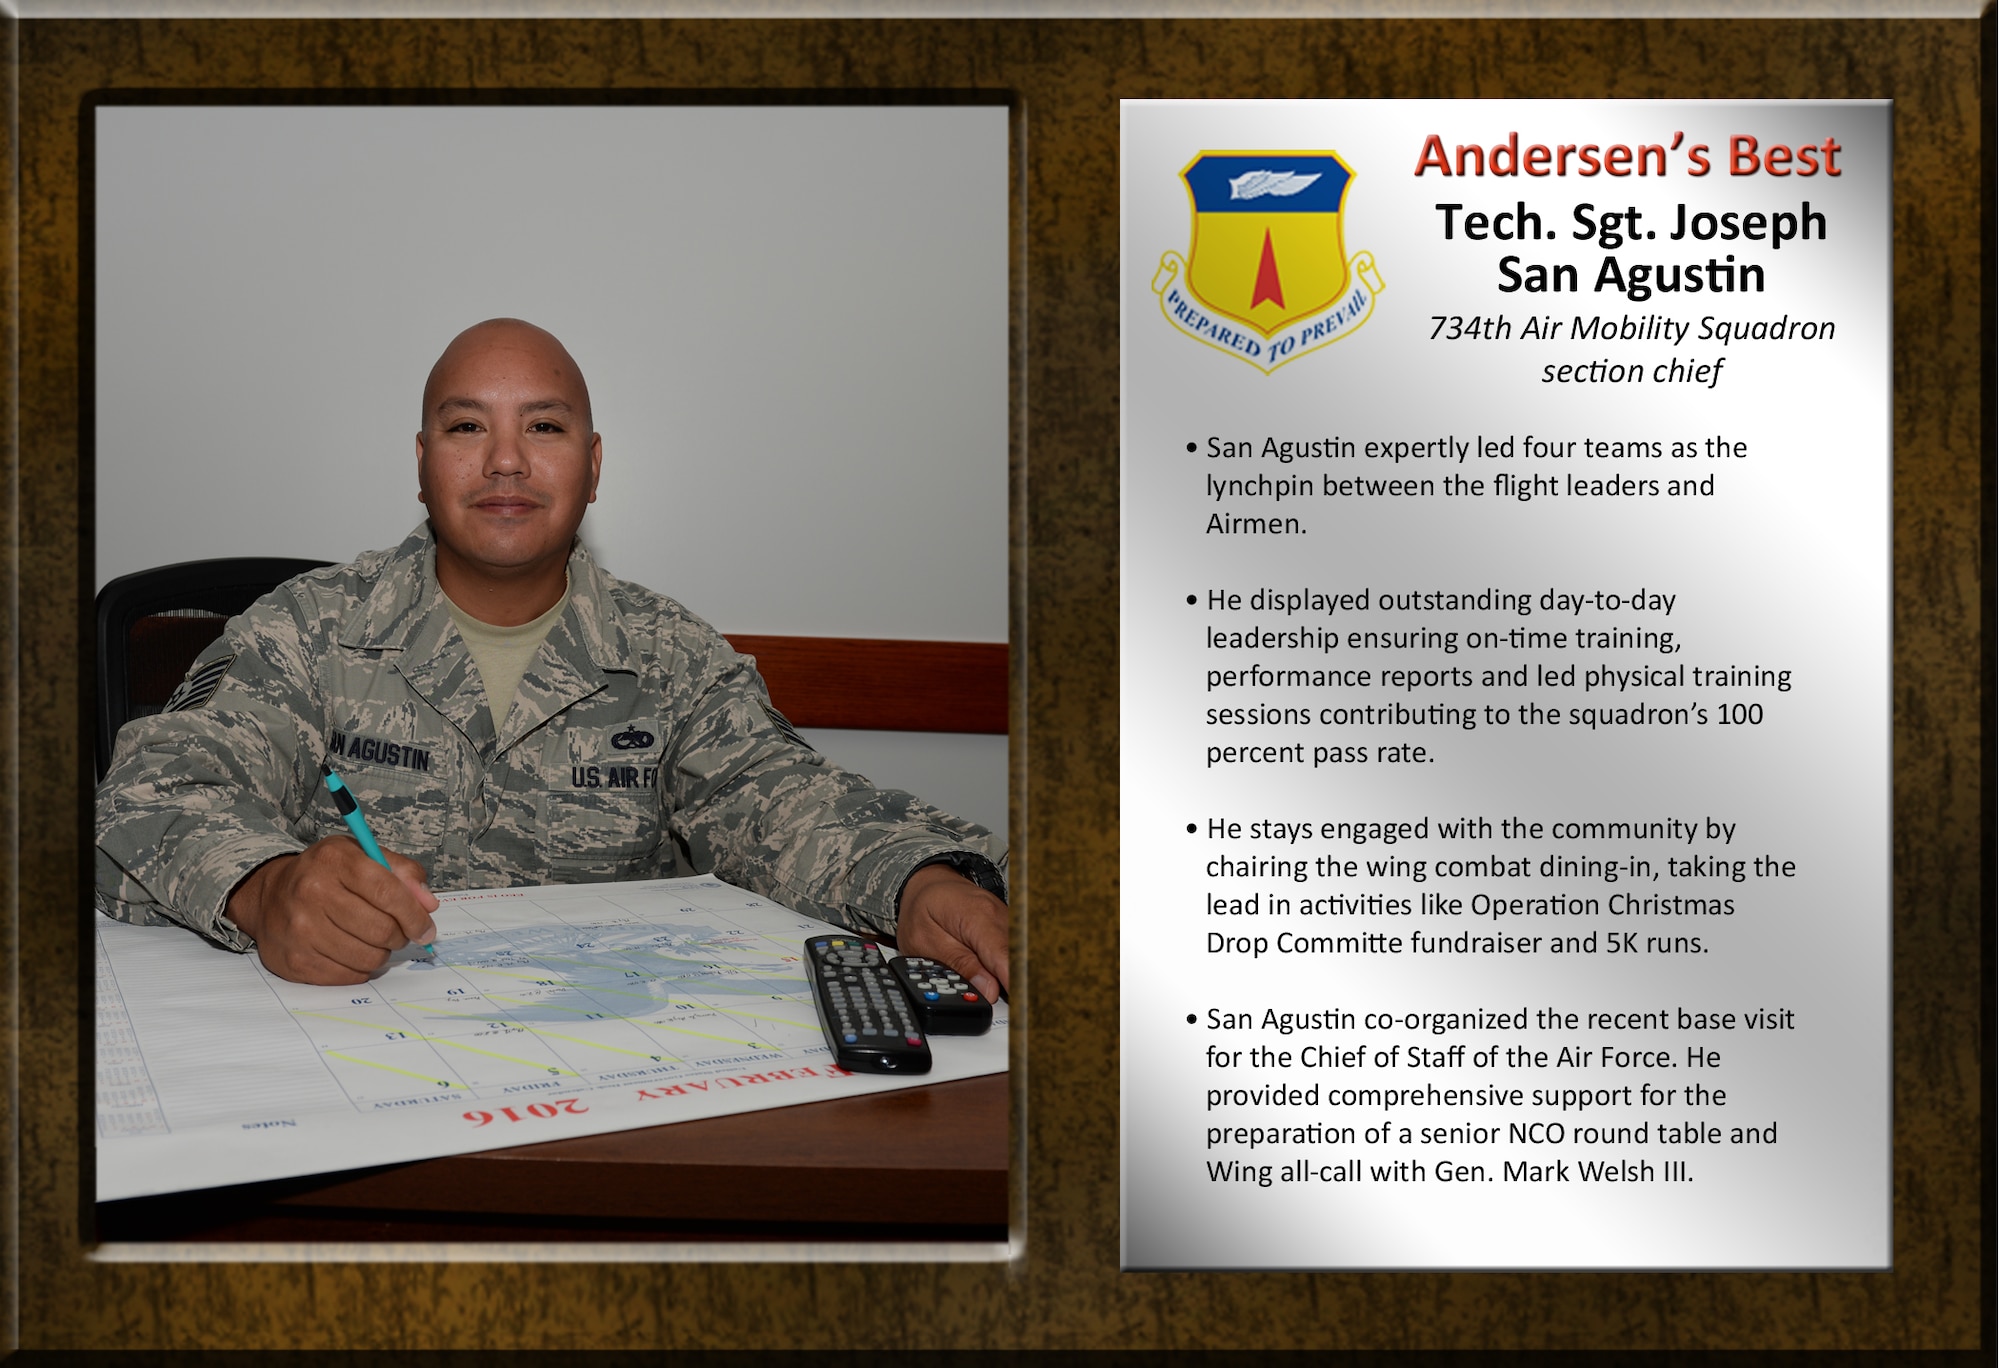 Team Andersen's Best recognizes Airmen and civilian professionals for outstanding contributions to mission and team success. As spotlight performers, individuals are chosen by base leaders for demonstrating the Air Force's core values of integrity first, service before self, and excellence in all we do.  